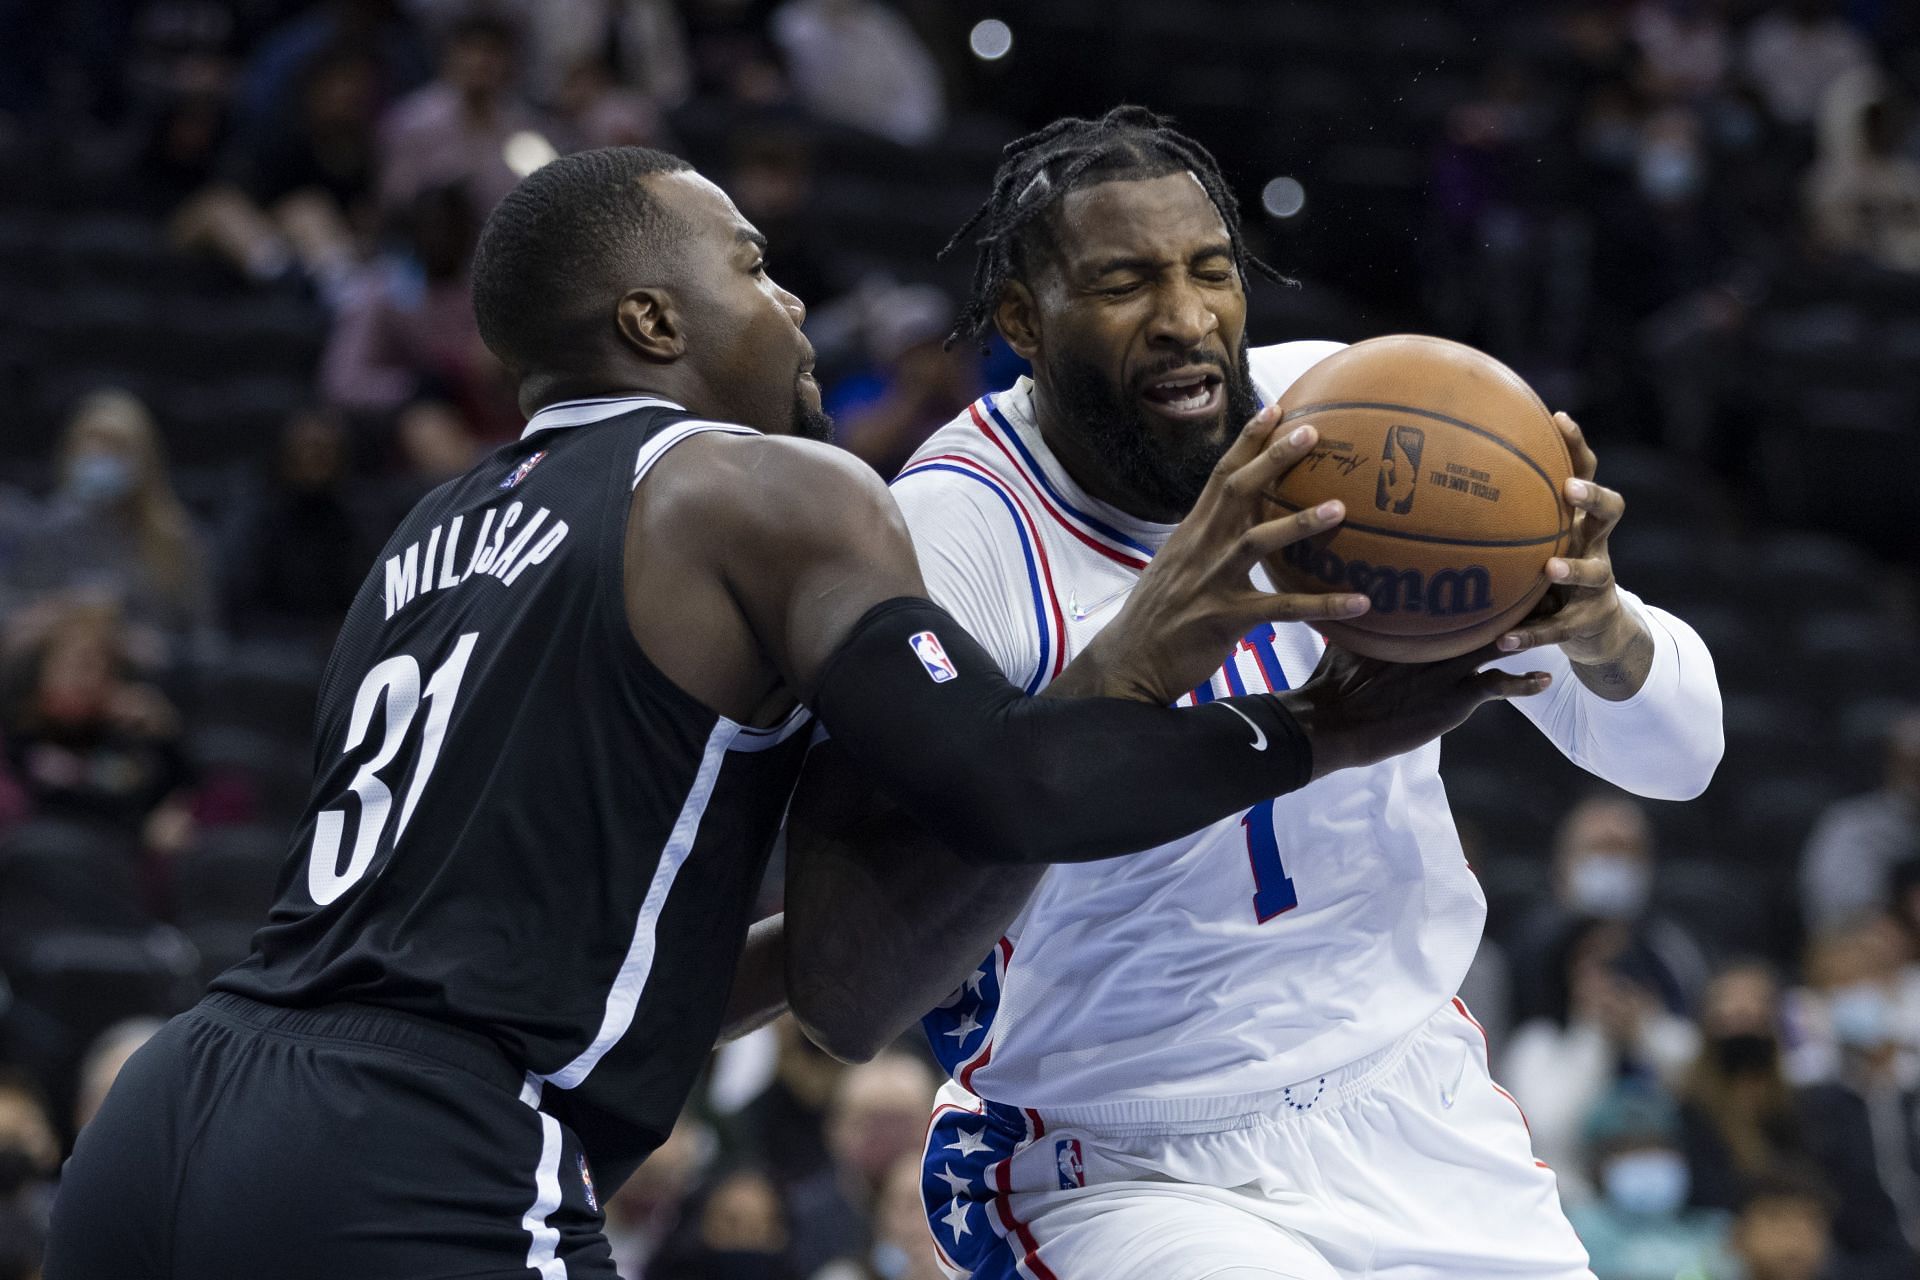 Andre Drummond #1 of the Philadelphia 76ers drives to the basket against Paul Millsap #31 of the Brooklyn Nets